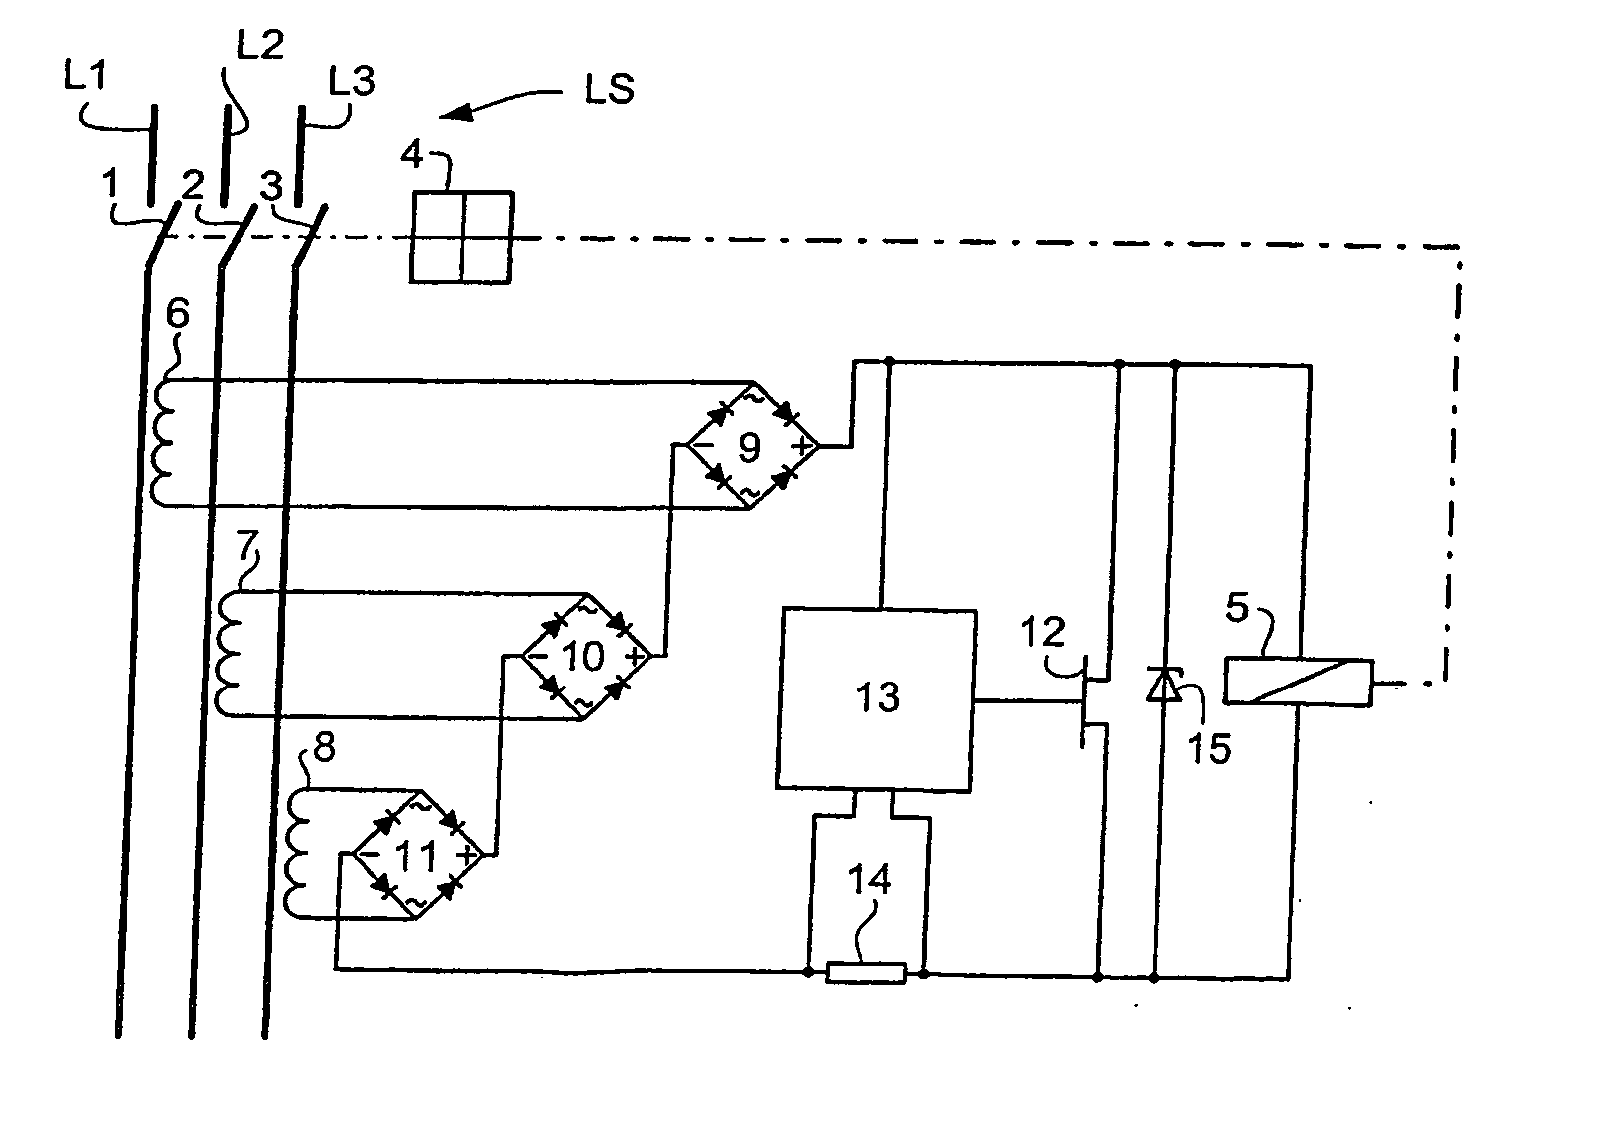 Analogue electronic trip device for an electrical power breaker responding to a short-circuit